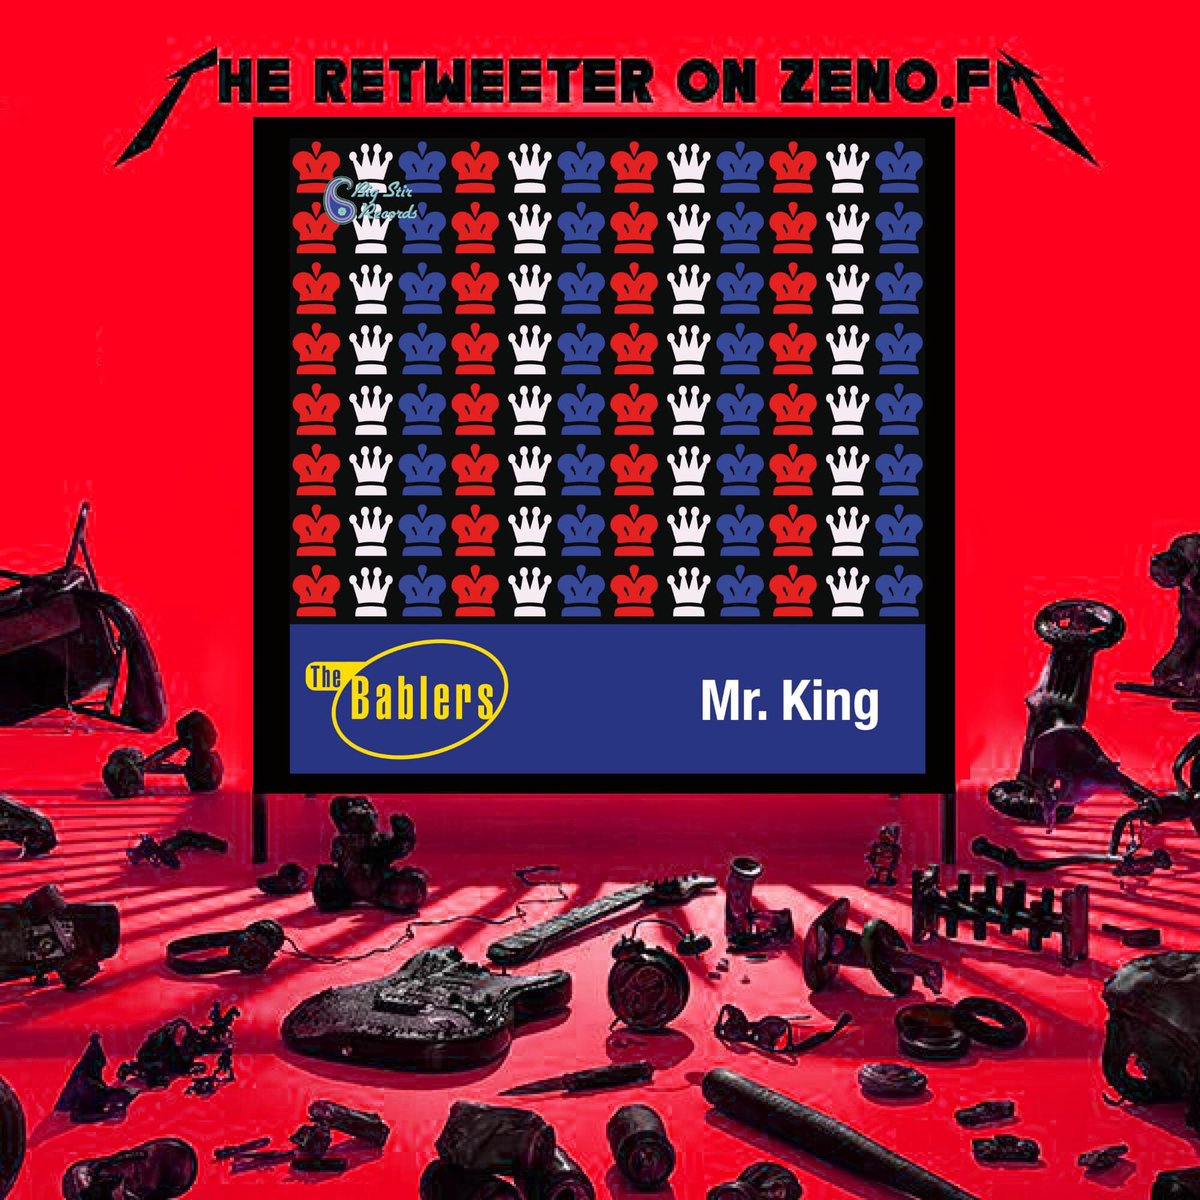 The new single 'Mr. King' from THE BABLERS gets a spin on ZenoFM from THE RETWEETER! The track's out now everywhere (orcd.co/bablers-mrking) and you can hear the Retweeter's show at:
zeno.fm/radio/hitsofth…
#TheRetweeter #ZenoFM #TheBablers #IndiePop #RetroPop #GuitarPop